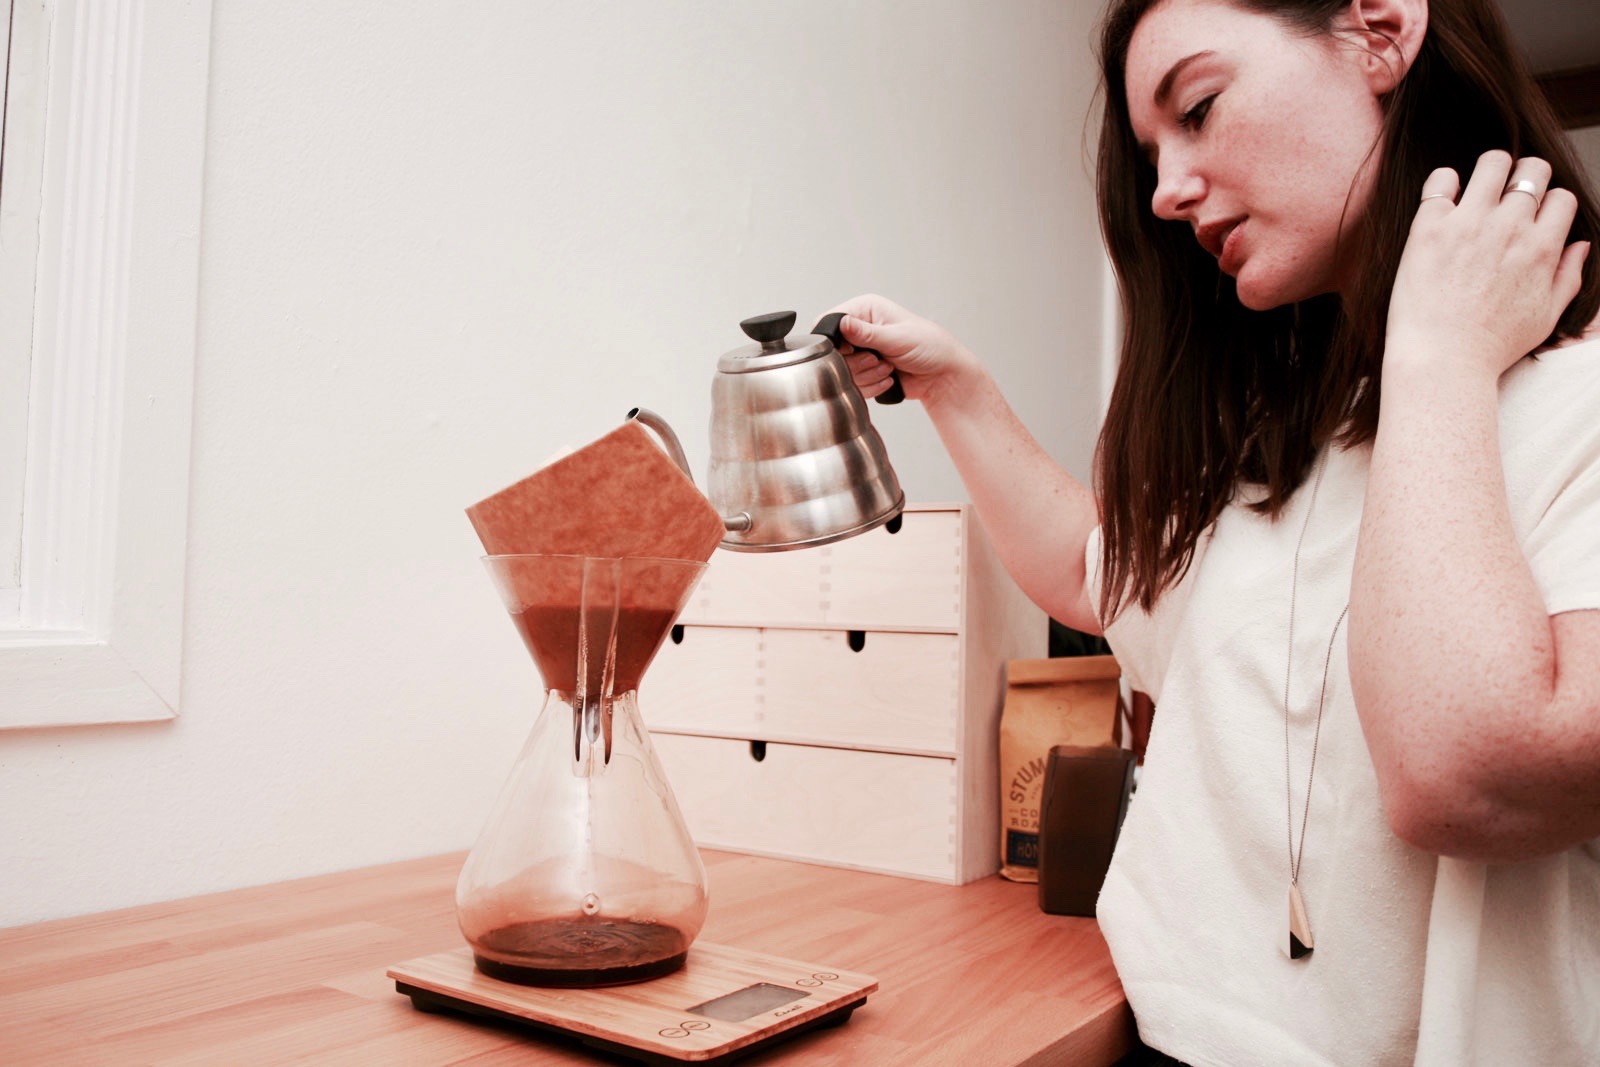 Alyssa pouring water to brew in the Chemex